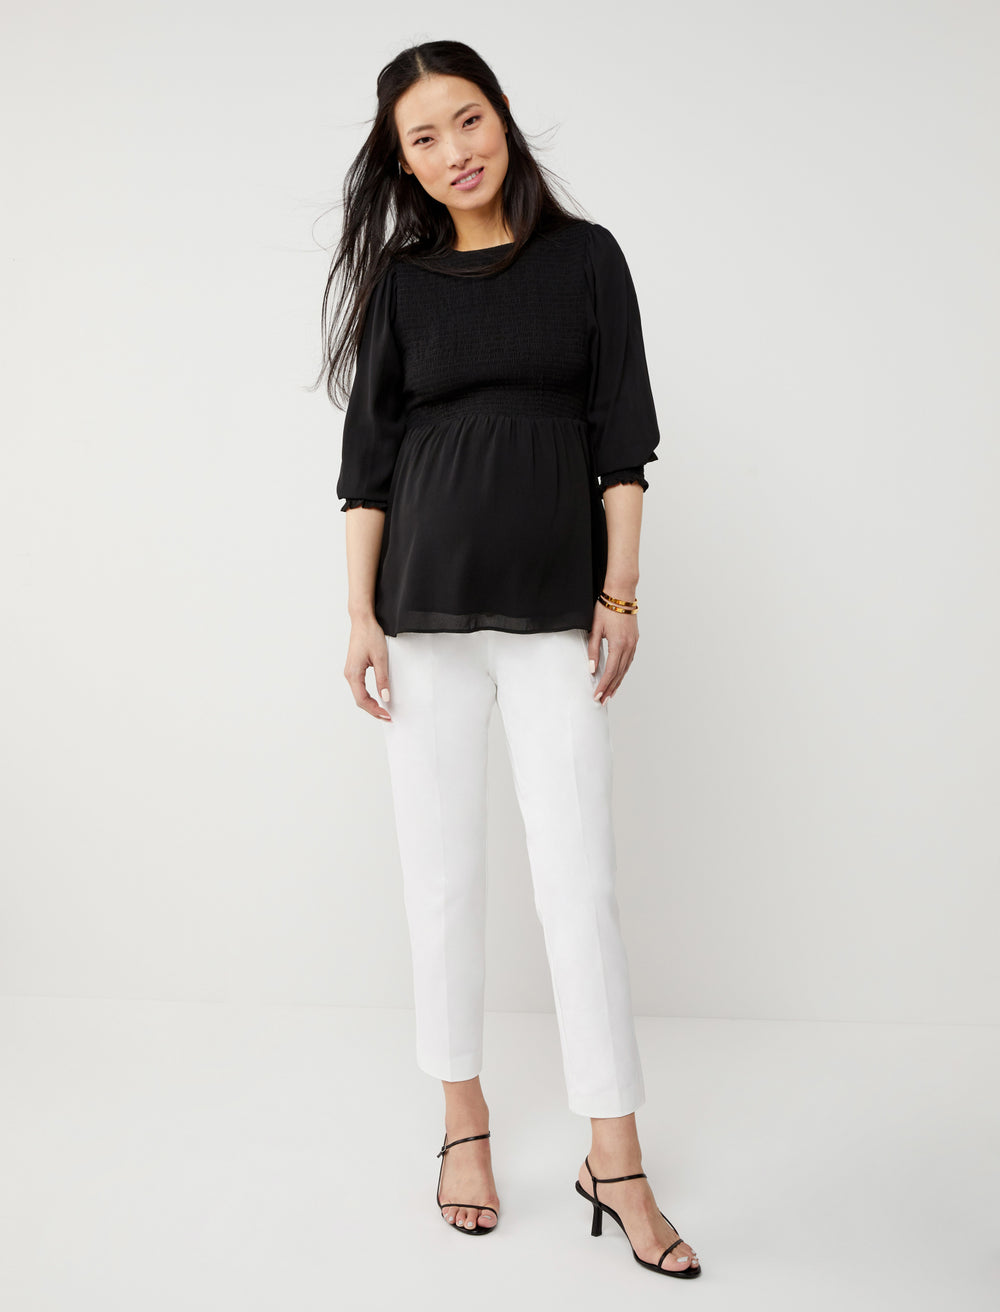 The Curie Secret Fit Belly Twill Slim Ankle Maternity Pant - A Pea In the  Pod